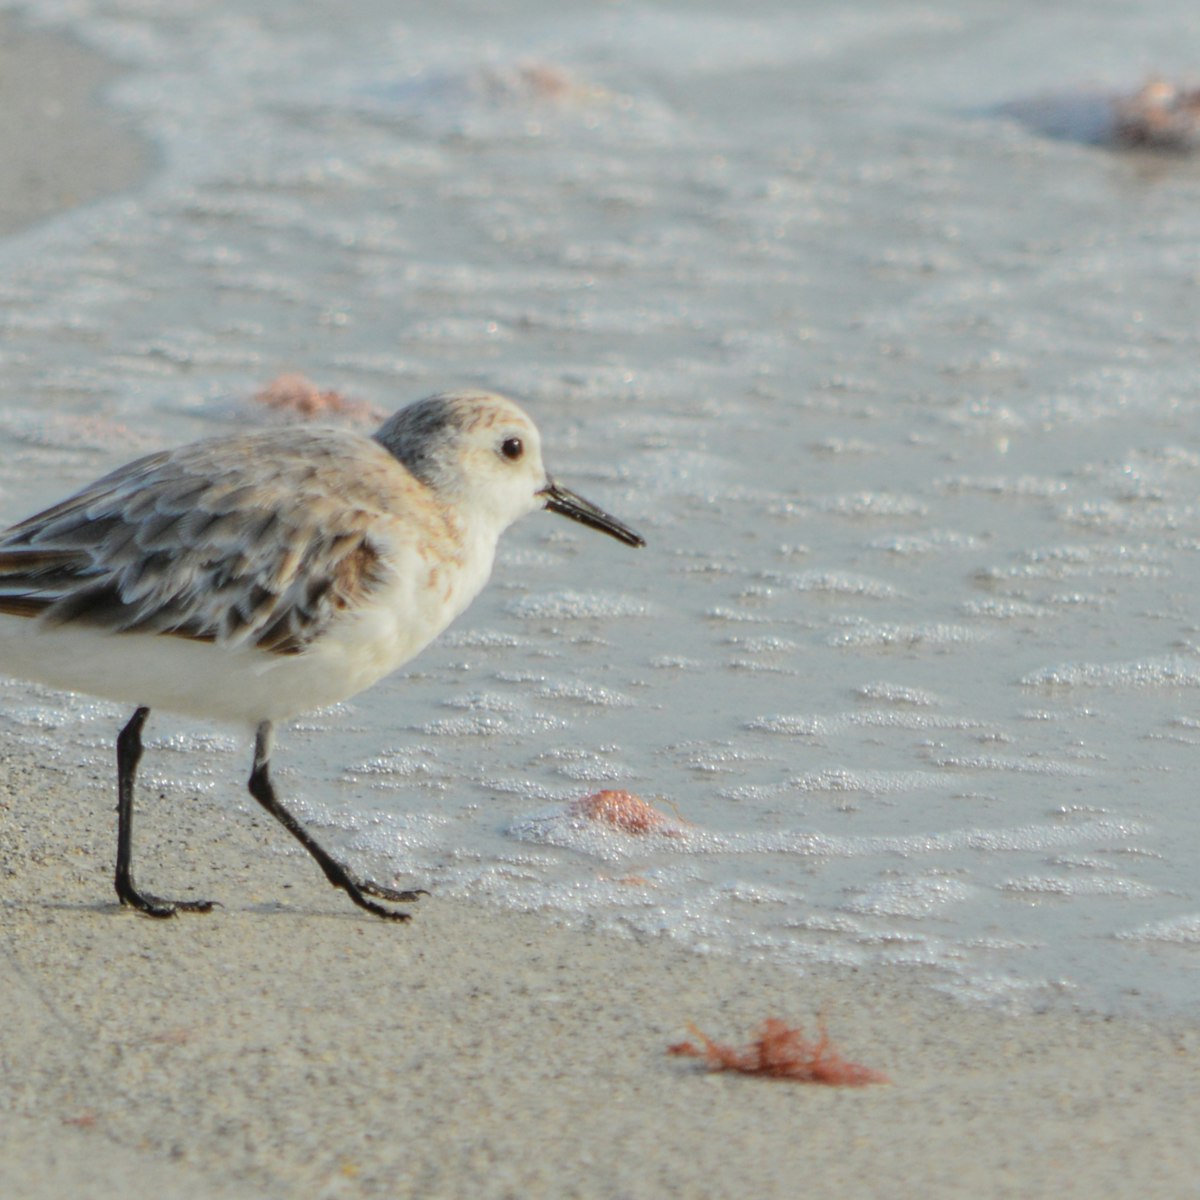 A sanderling (calidris alba) on the beach of the Gulf of Mexico in Florida.; Shutterstock ID 643836334; Your name (First / Last): Trisha Ping; GL account no.: 65050; Netsuite department name: Online Editorial; Full Product or Project name including edition: Trisha Ping/65050/Online Editorial/Florida